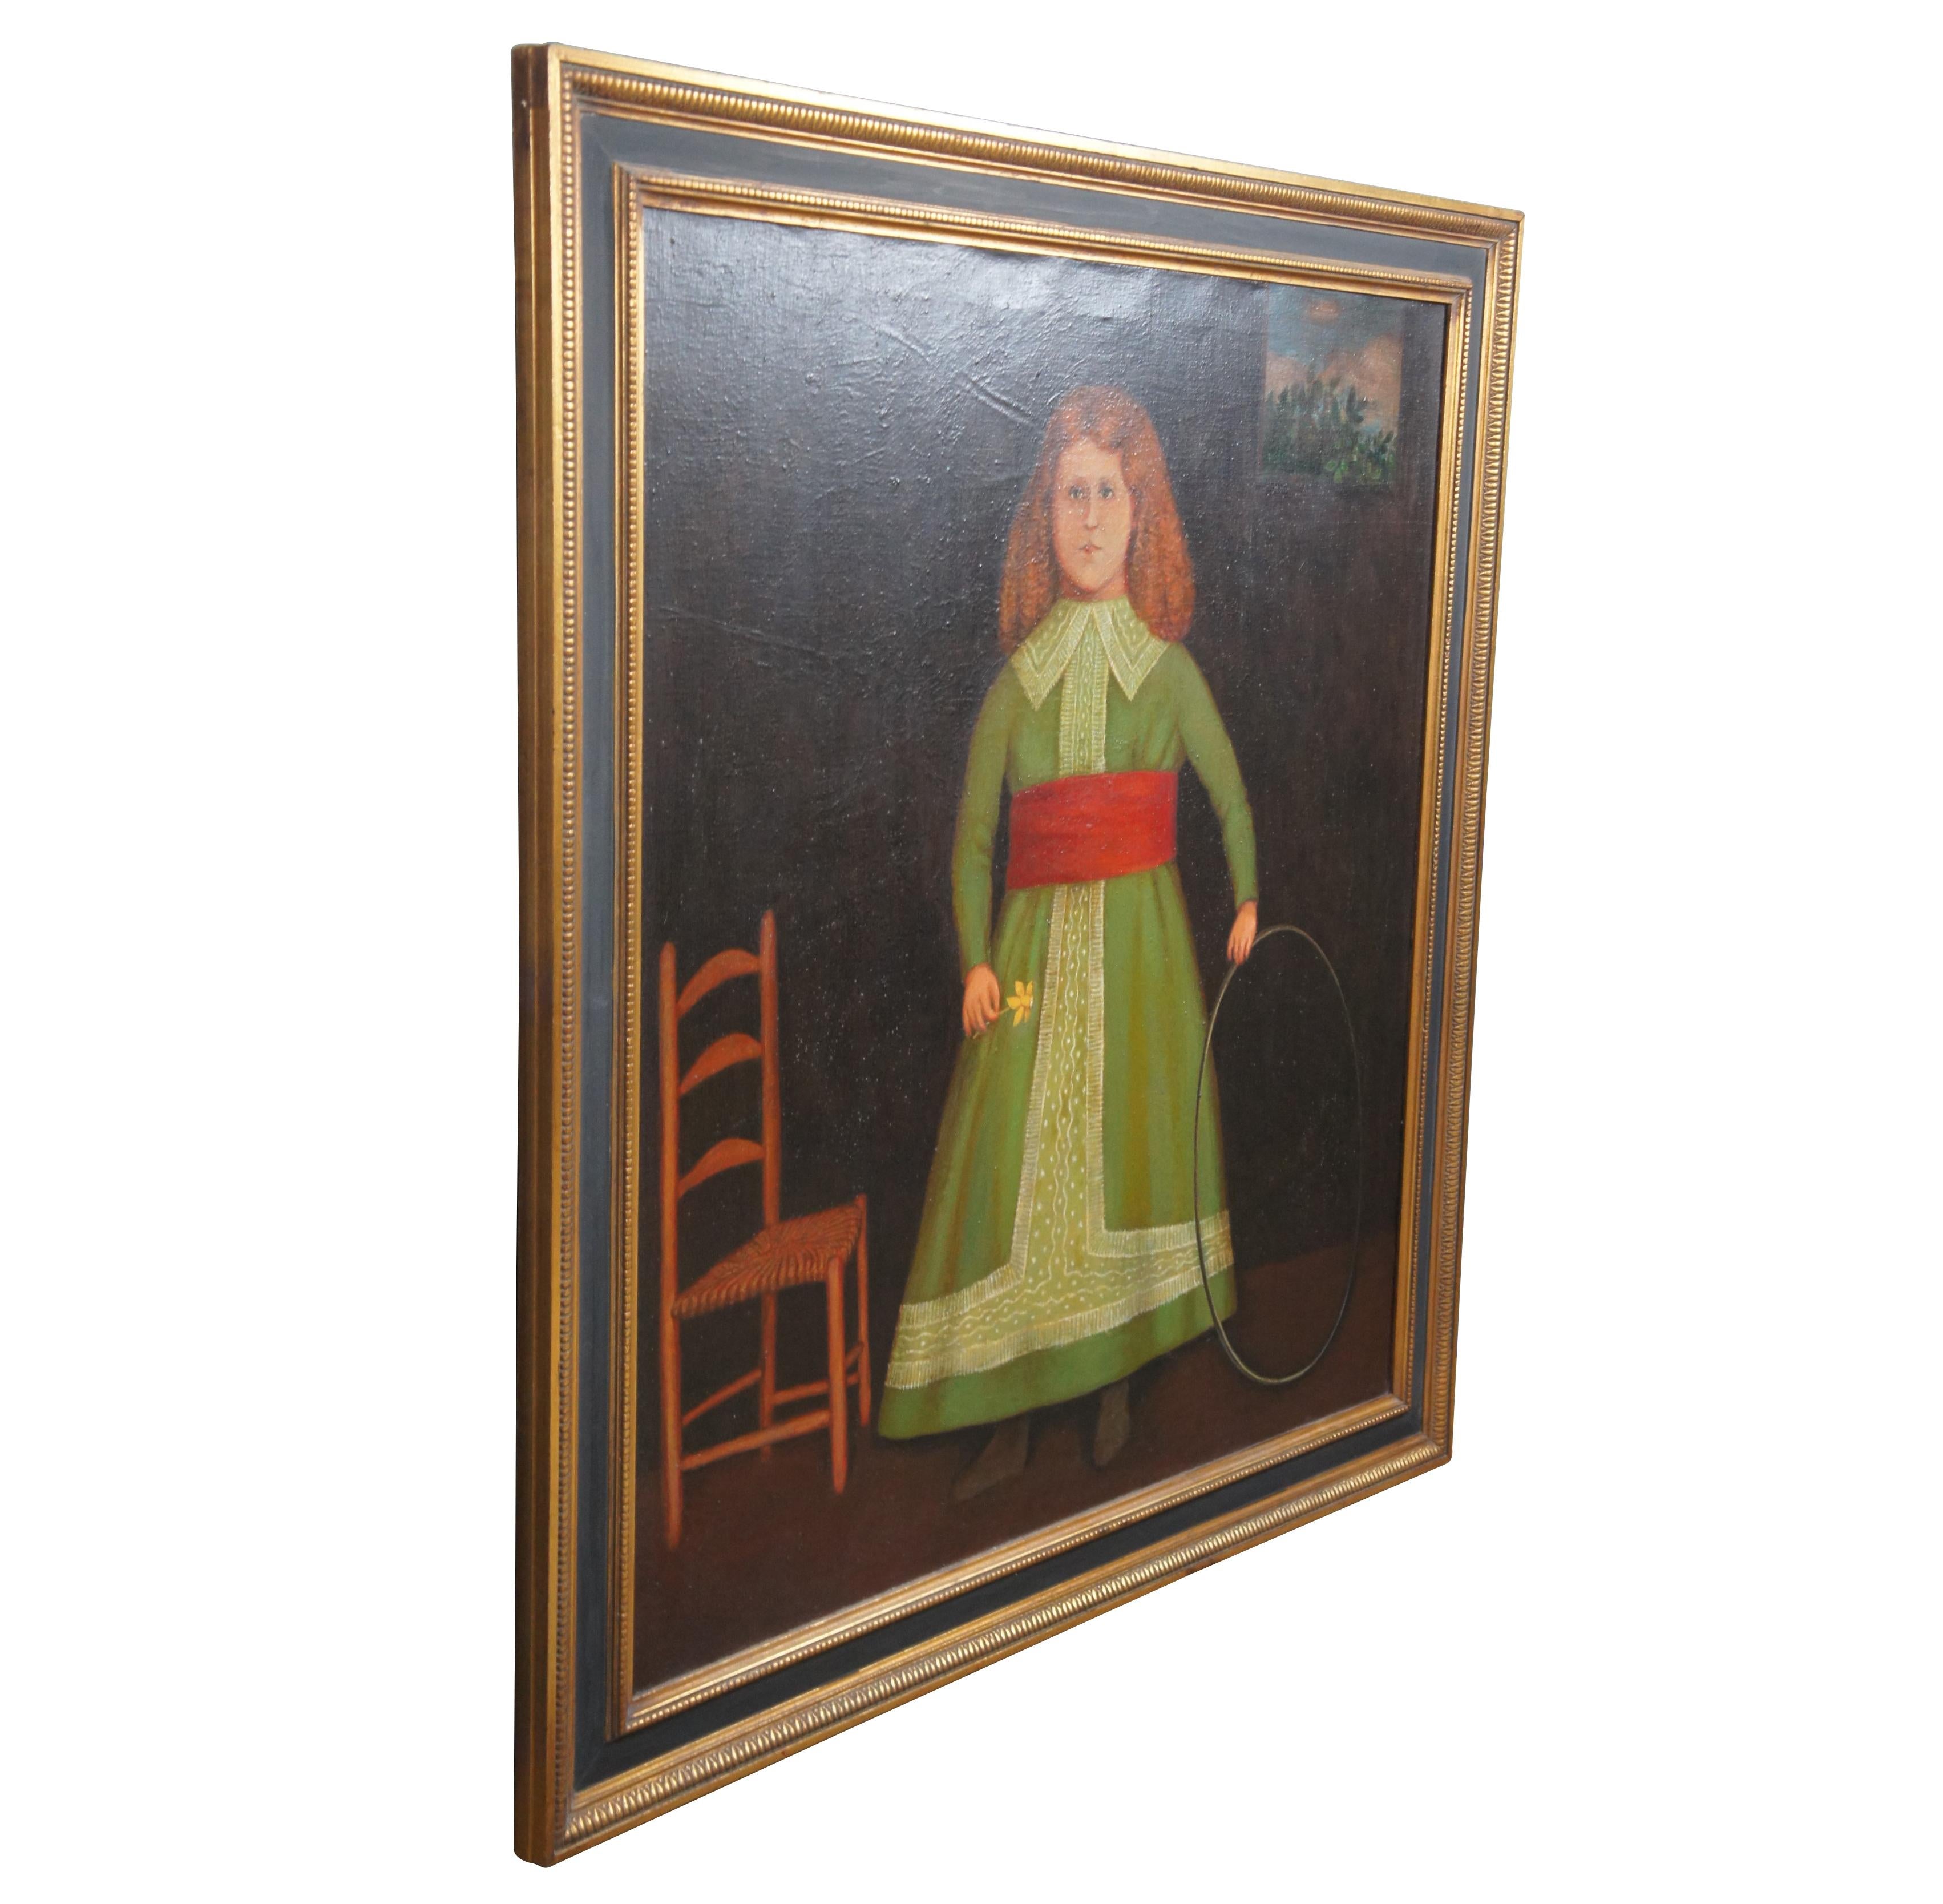 A Large format Primitive Folk Art style full length portrait painting, circa last half 20th century. Features a young girl with red hair dressed in a green dress besides a Shaker chair with hoop in one hand and daisy in the other. The portrait is